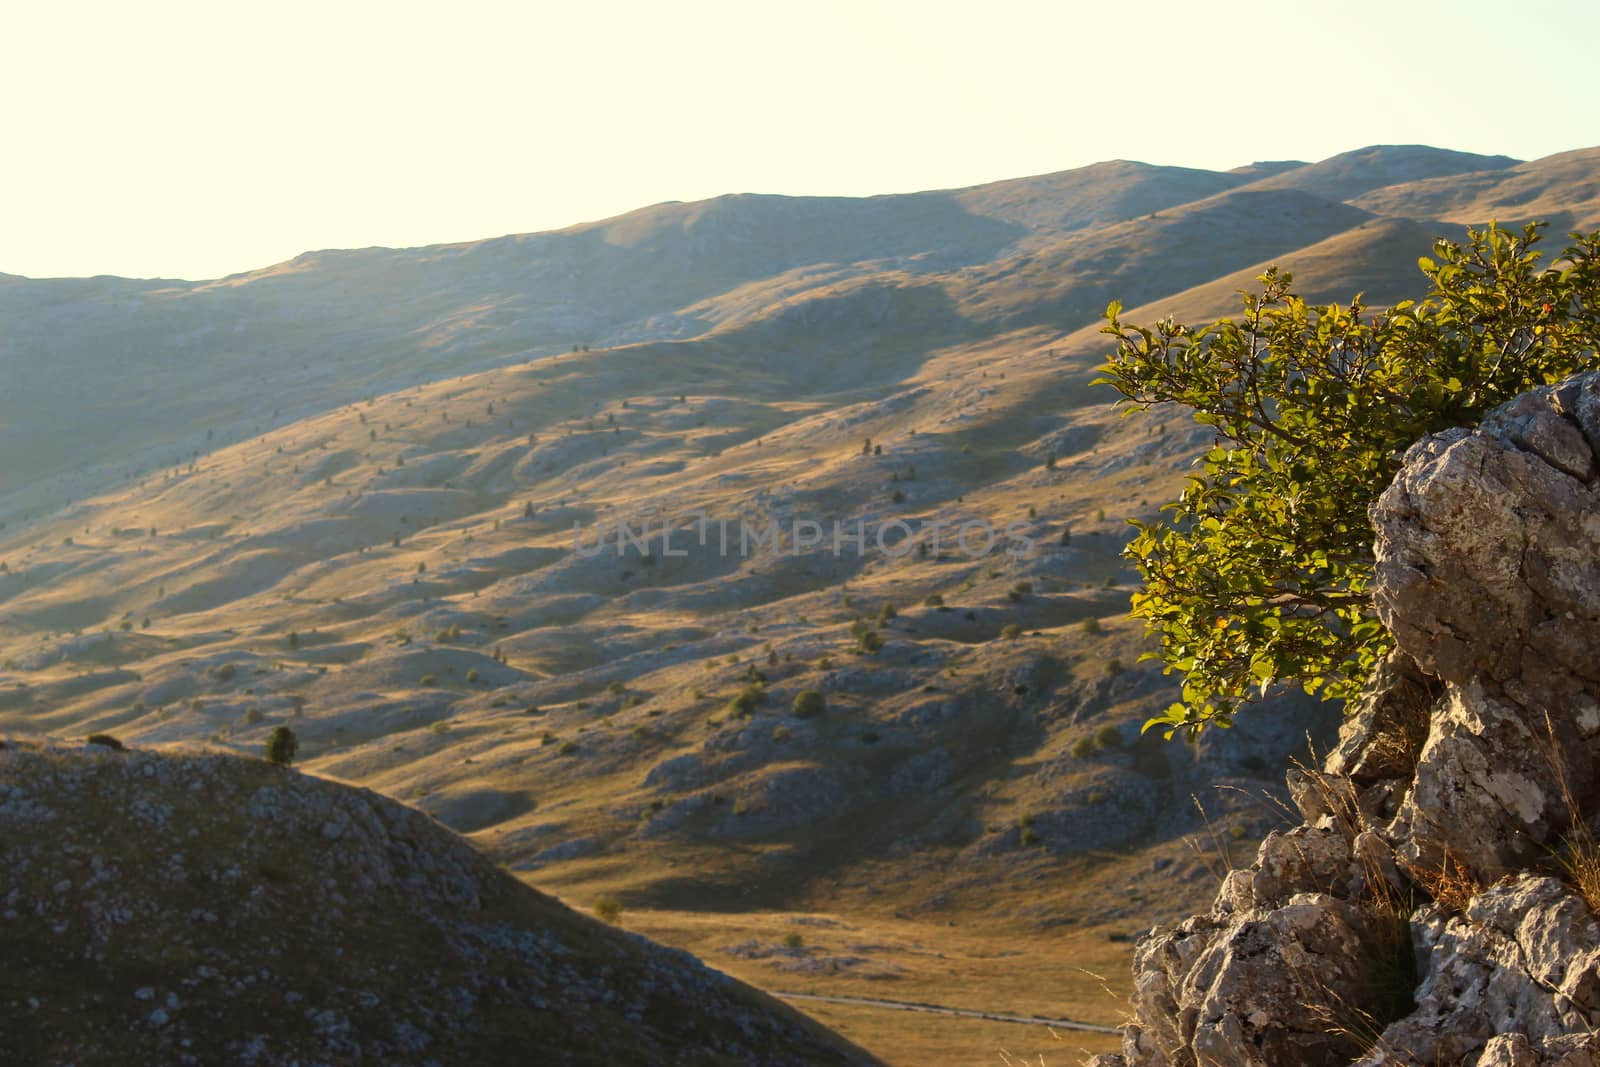 The rocky landscape of the Bjelasnica mountain. On the mountain Bjelasnica, Bosnia and Herzegovina.